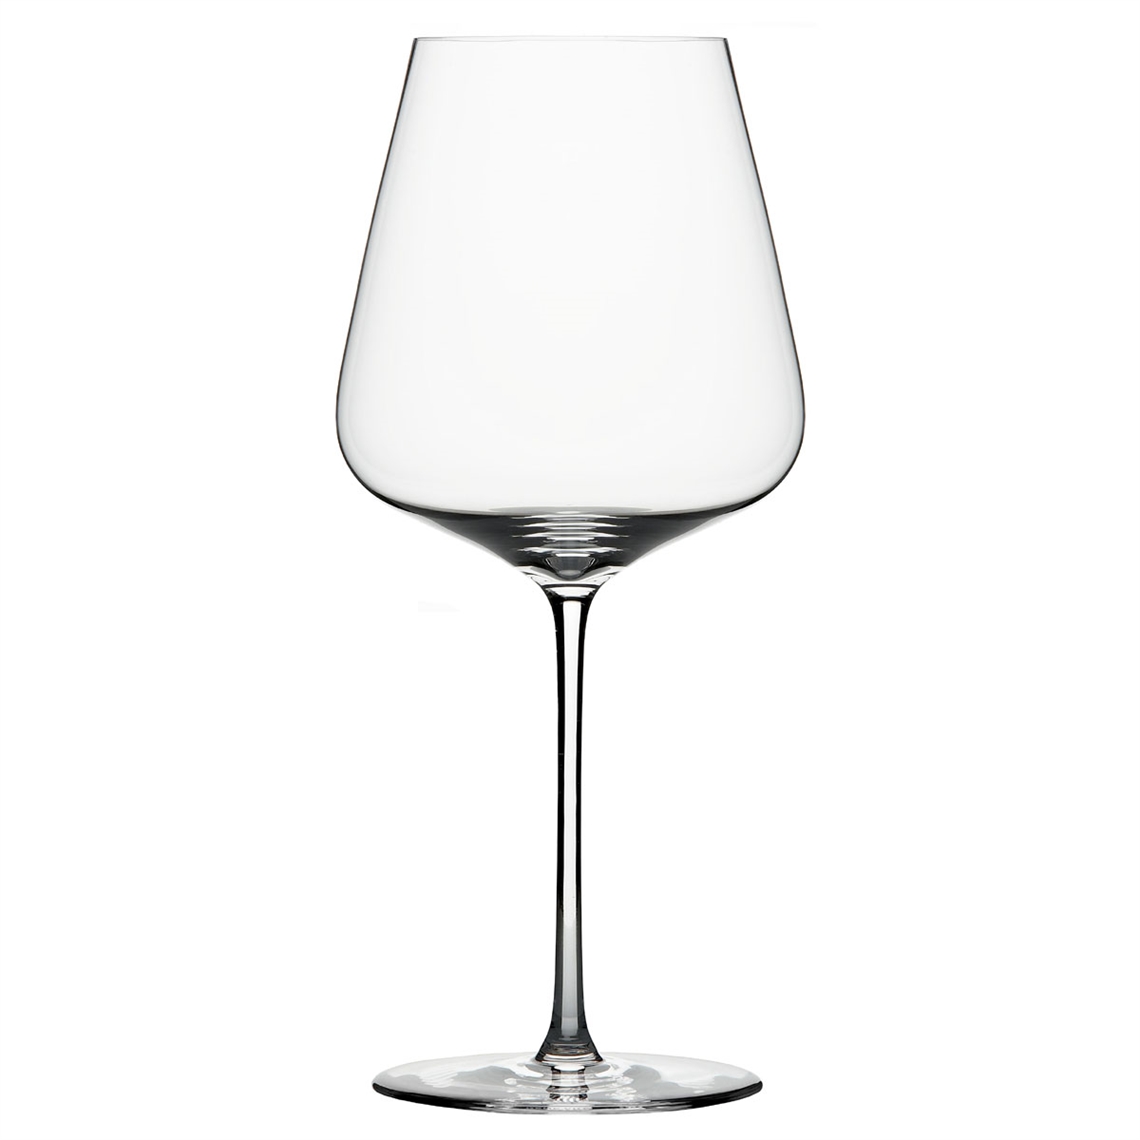 View more spirit glasses from our Premium Mouth Blown Glassware range